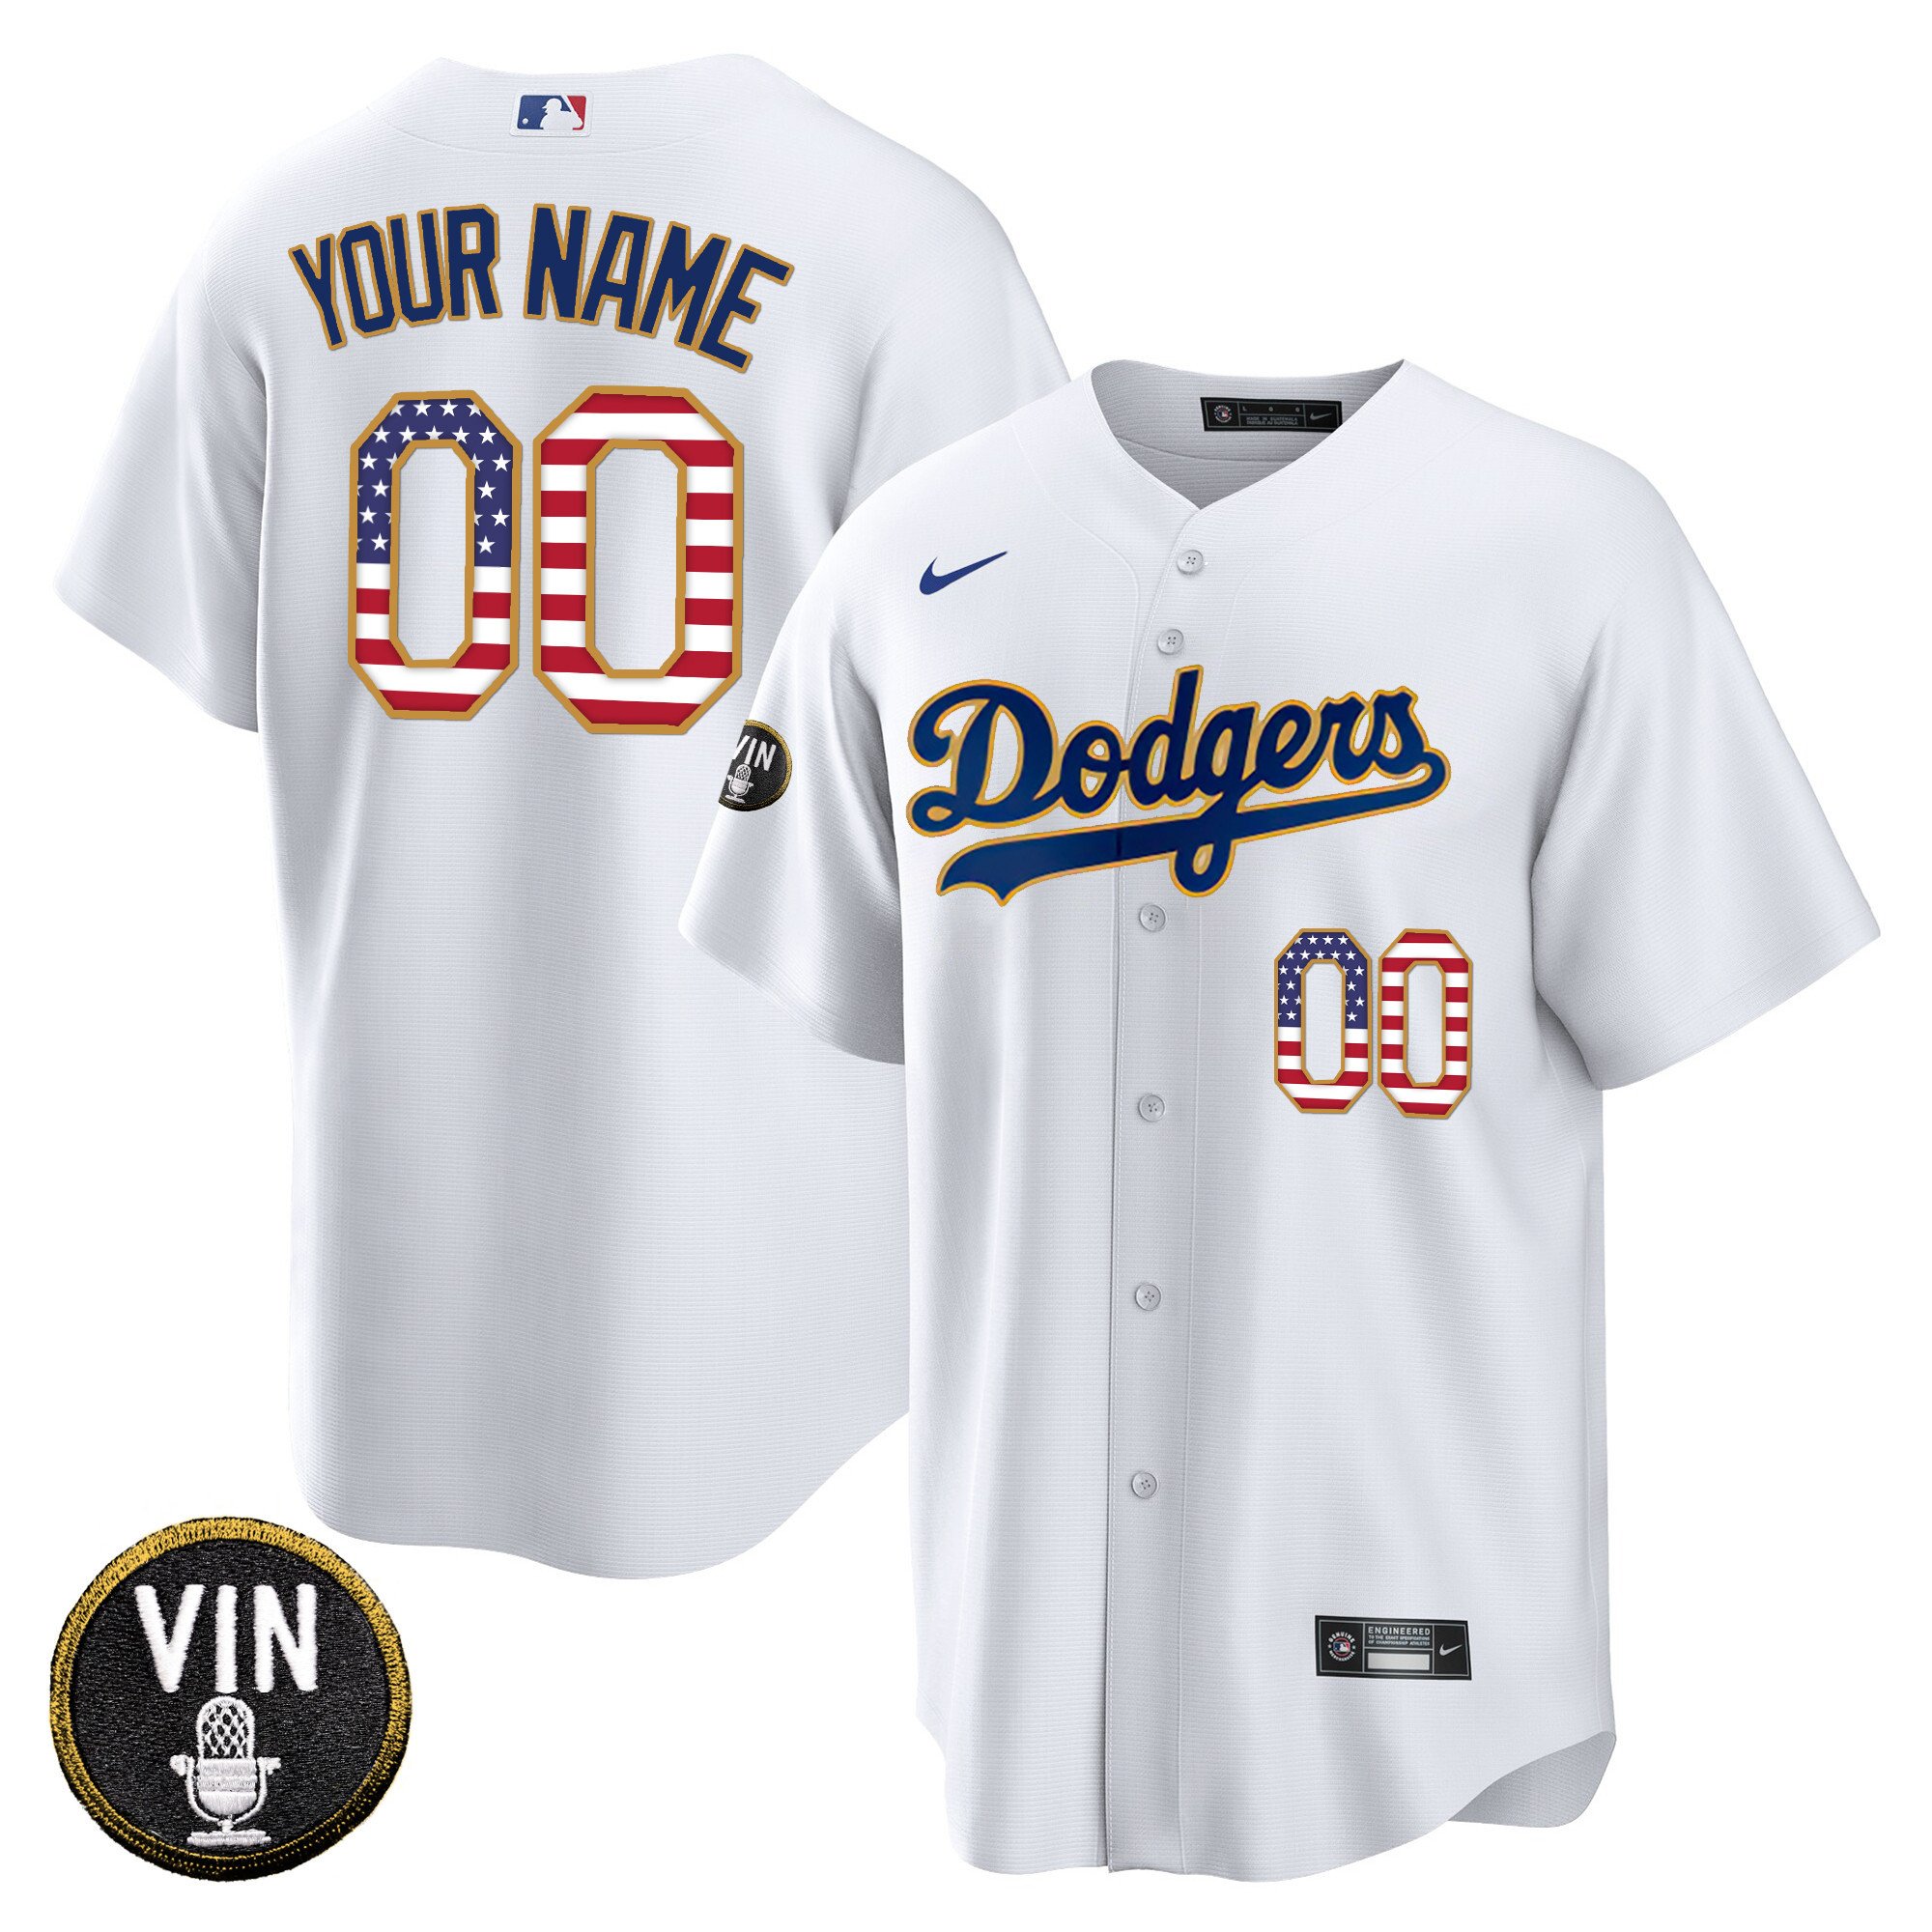 Women's Dodgers Mexico Baseball Limited Jersey - All Stitched - Vgear